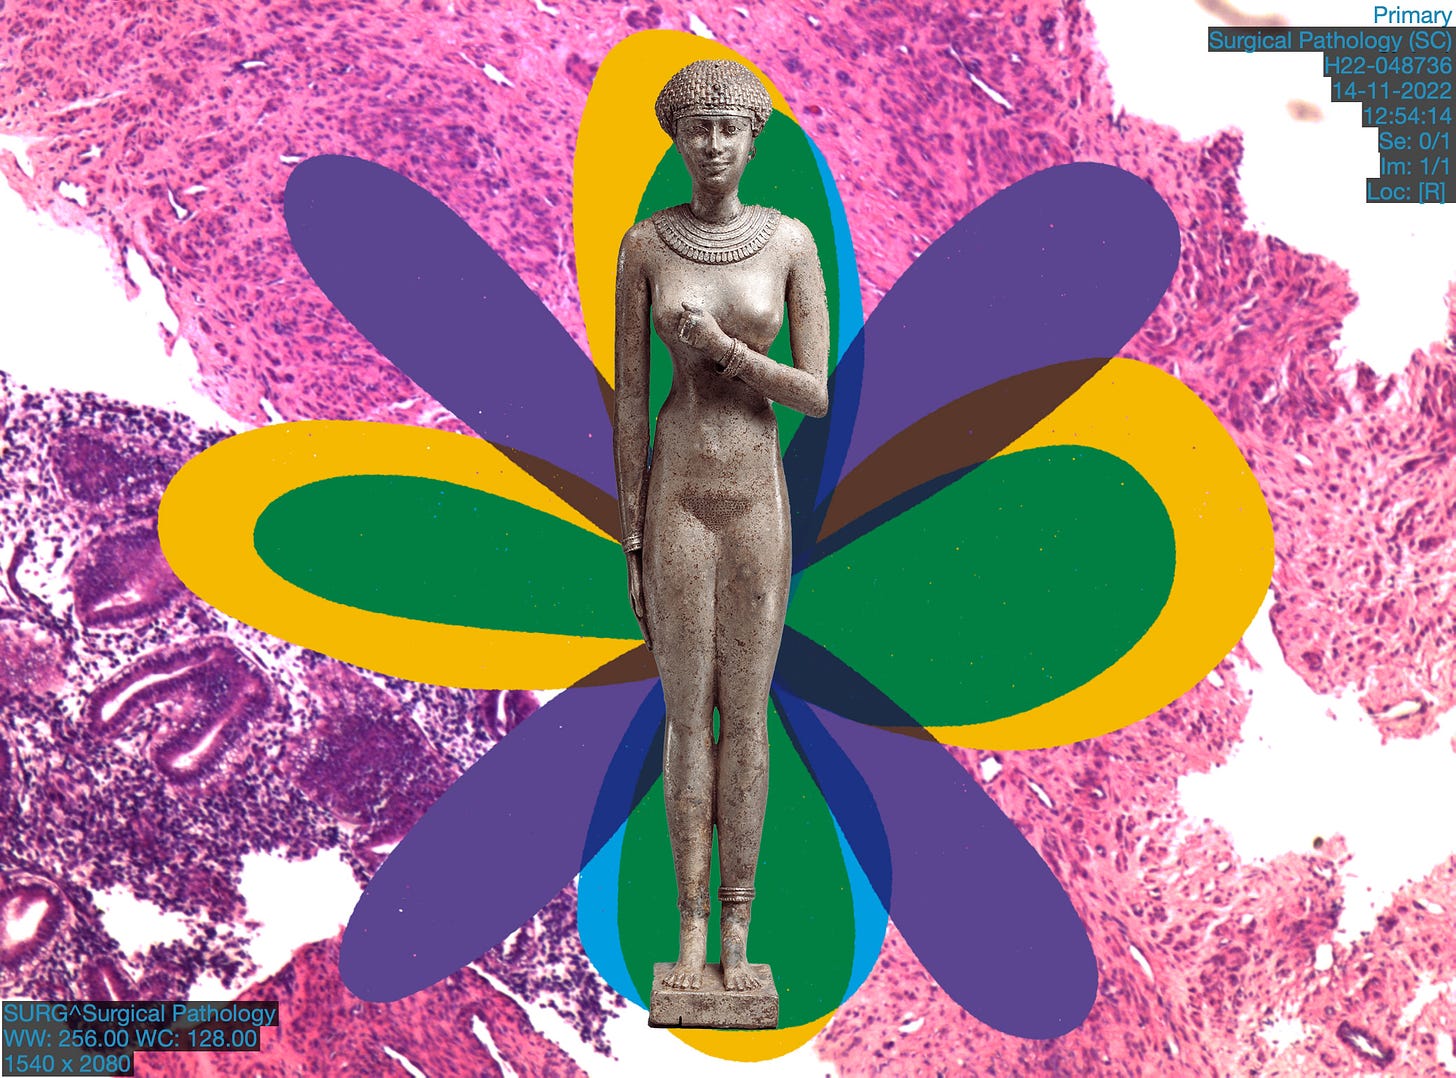 Collage comprised of a biopsy from some tissue removed from yours truly, layered painting and a 610–595 B.C. statuette of a royal woman